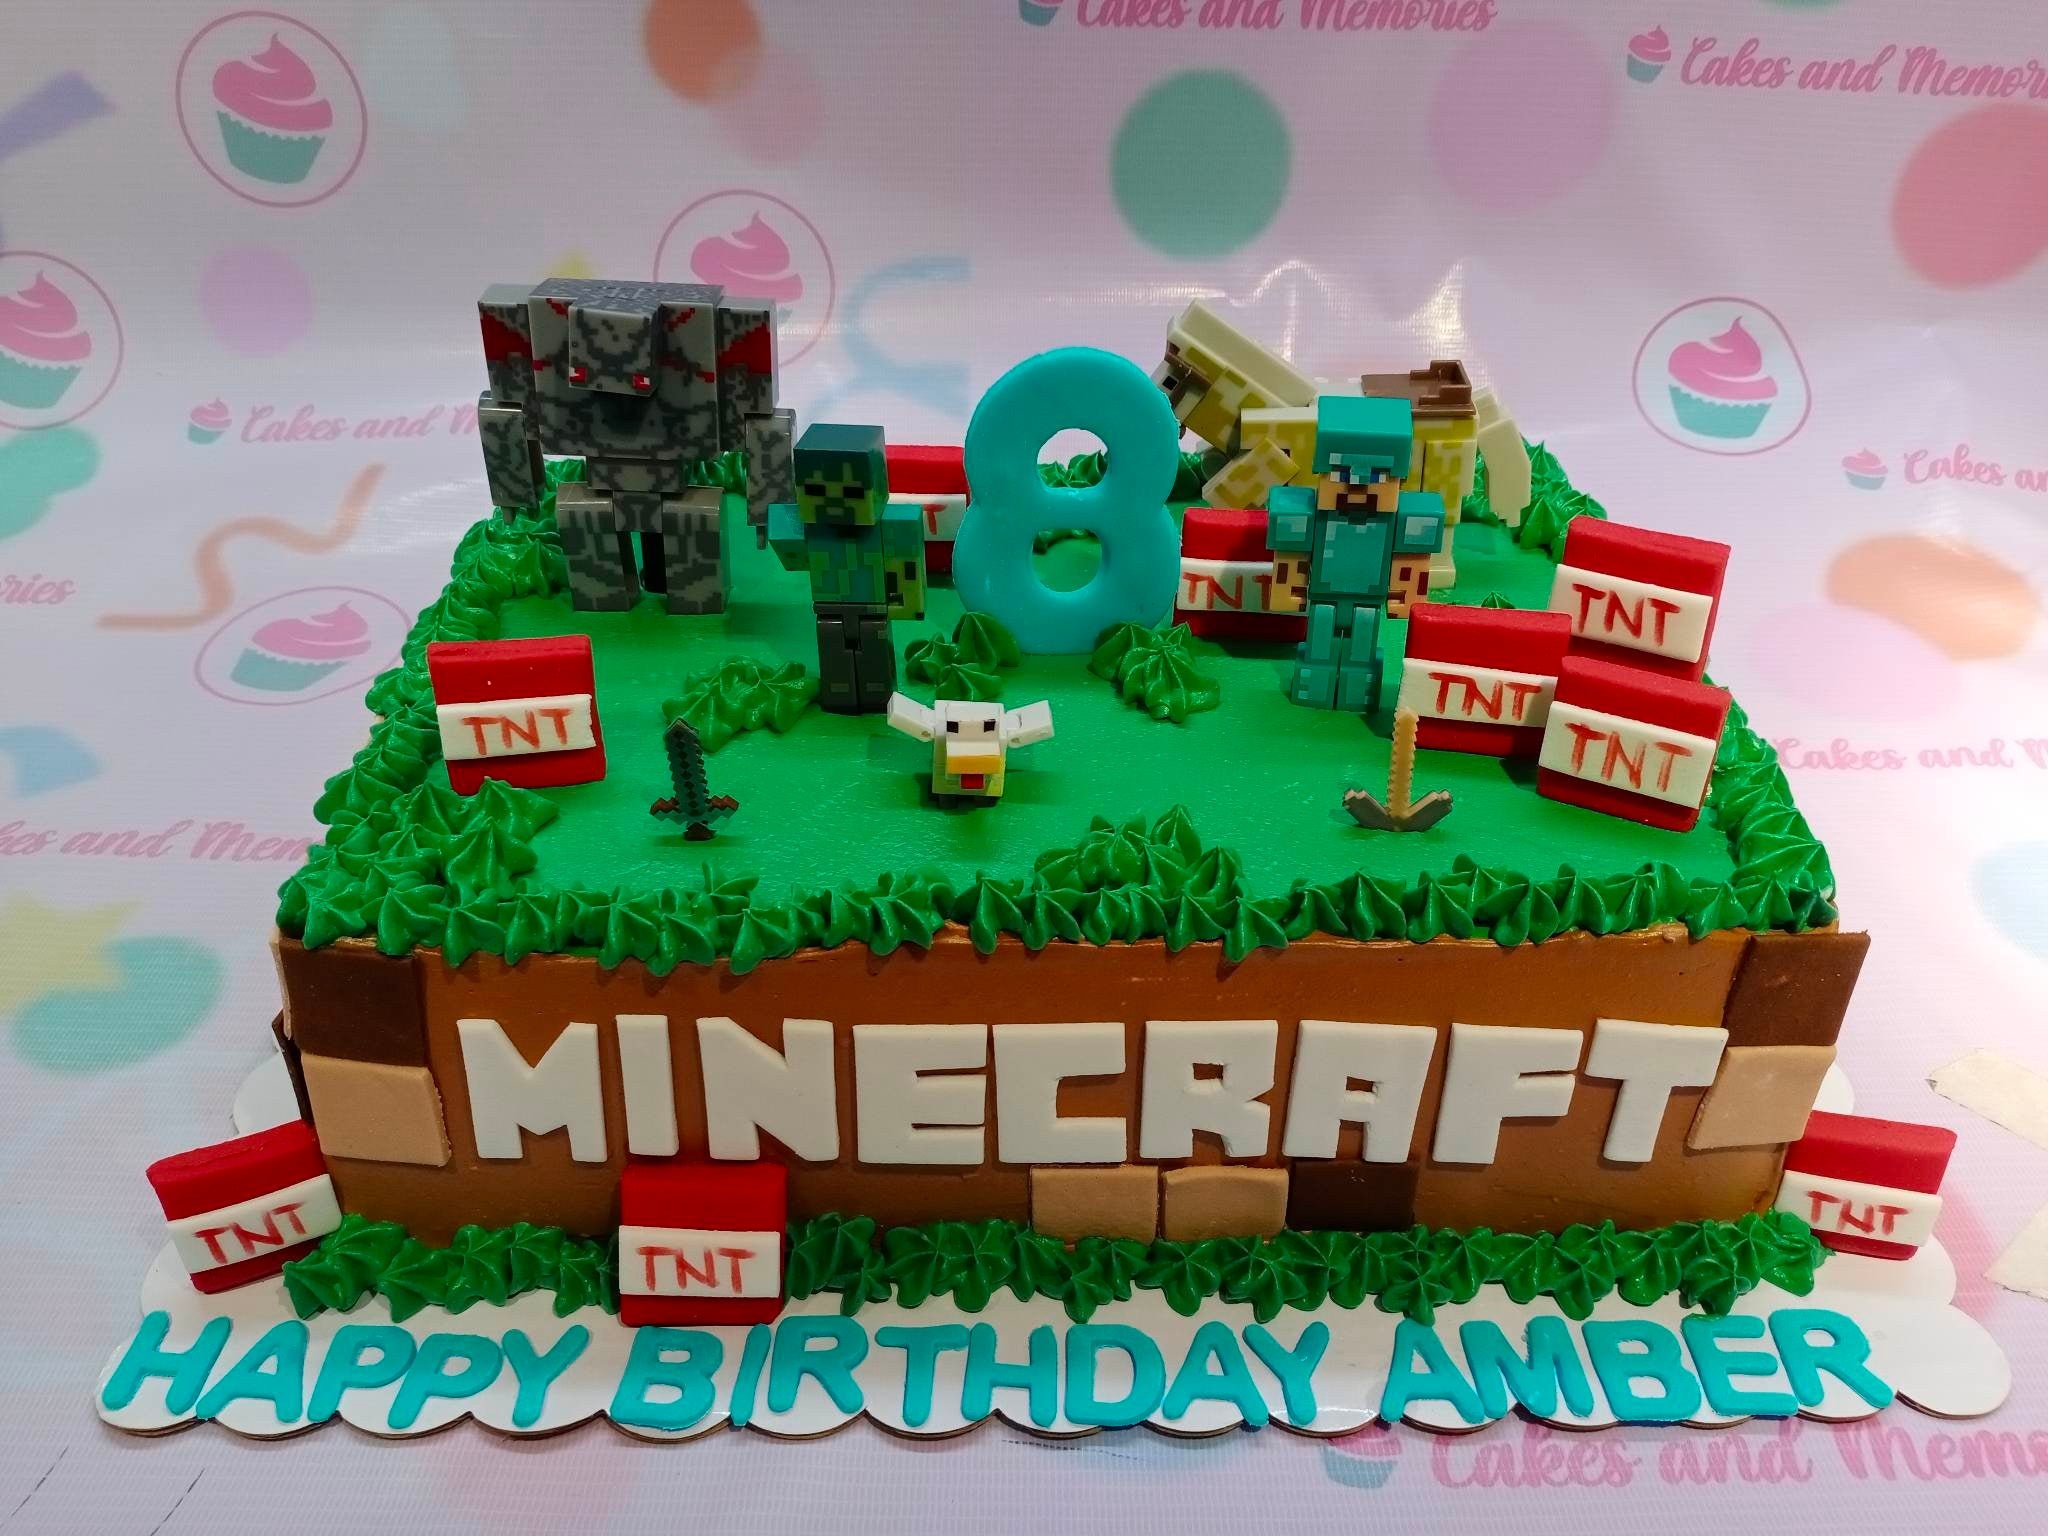 This custom decorated Minecraft cake is a must-have for any videogames fan and children's birthday party! It is decorated with an intricate combination of green and brown blocks, perfect for immersing any online gamers into the world of Minecraft. Get your customized cake from us today, with toys as add-ons!